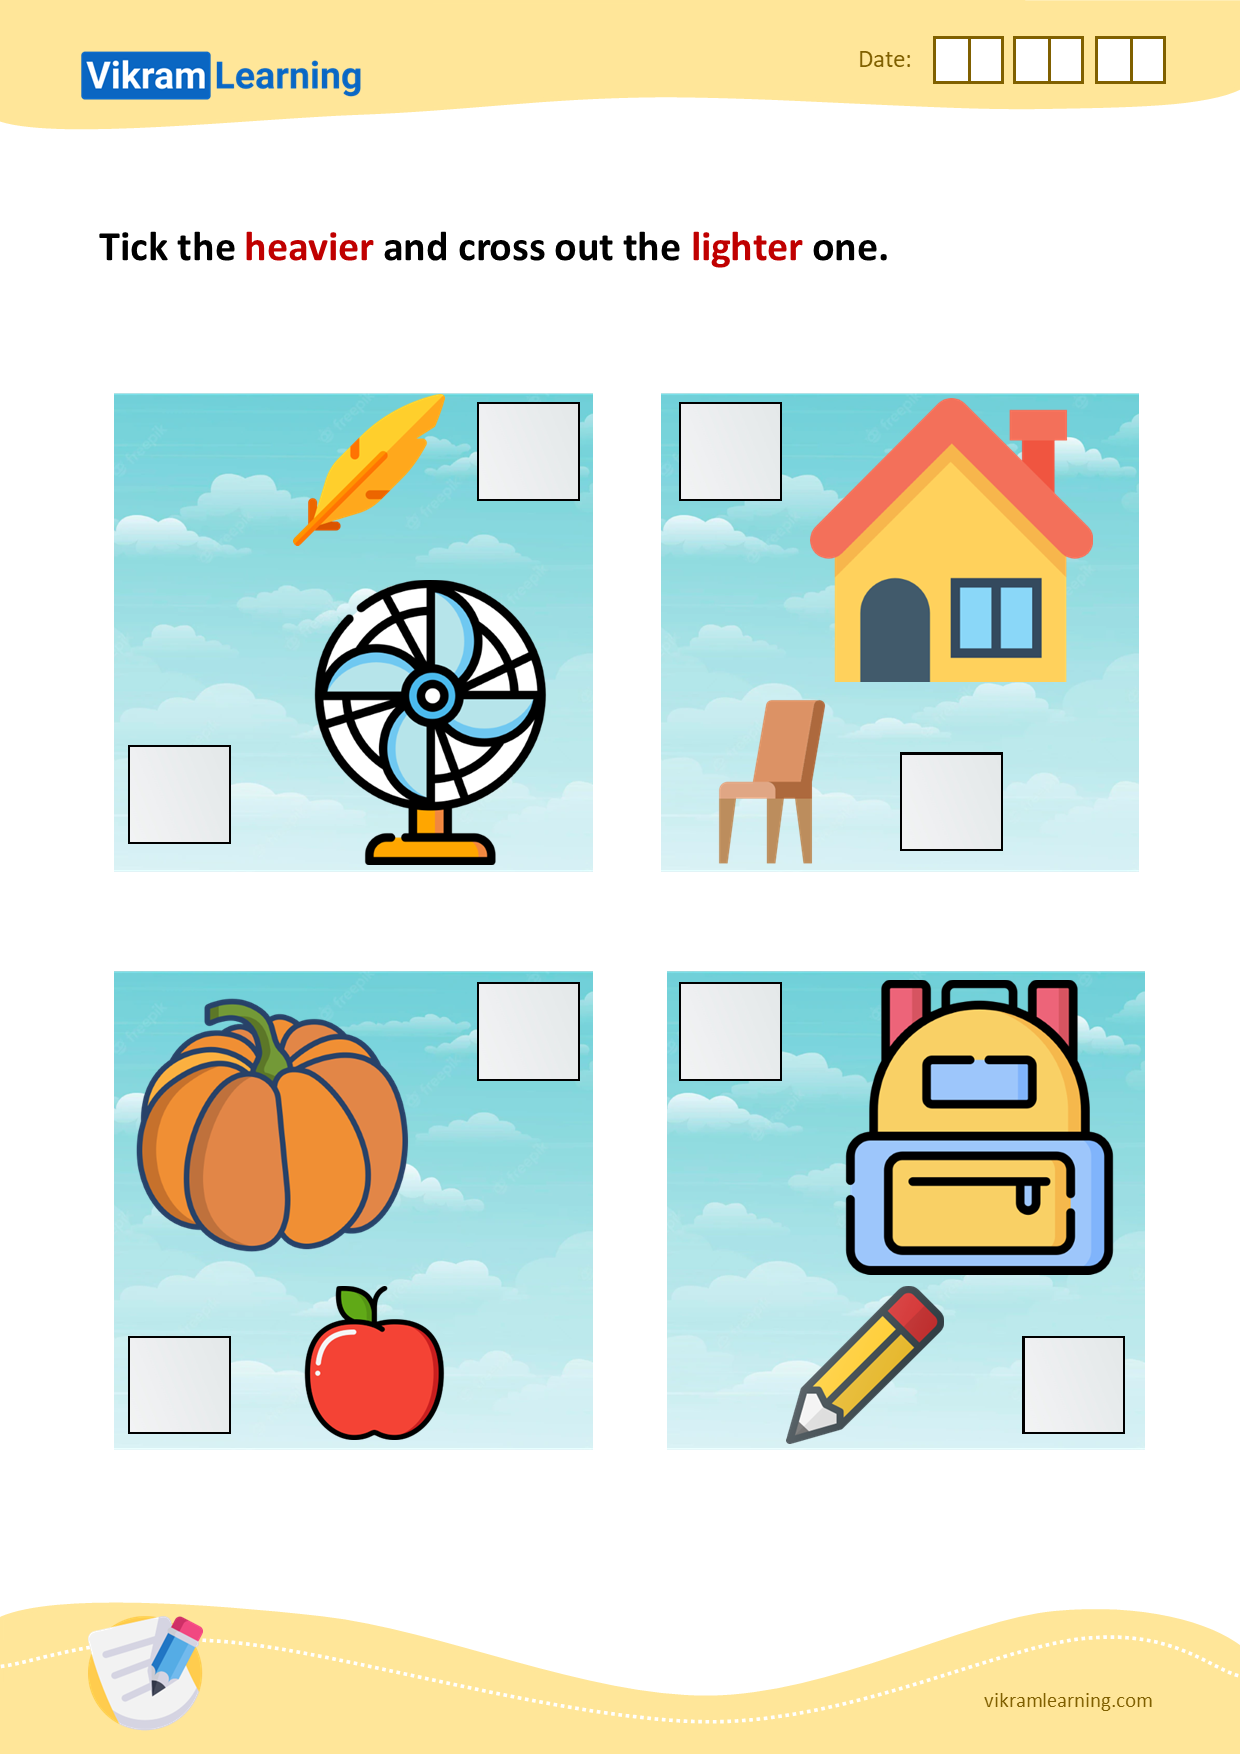 Download tick the heavier and cross out the lighter one - 2 worksheets